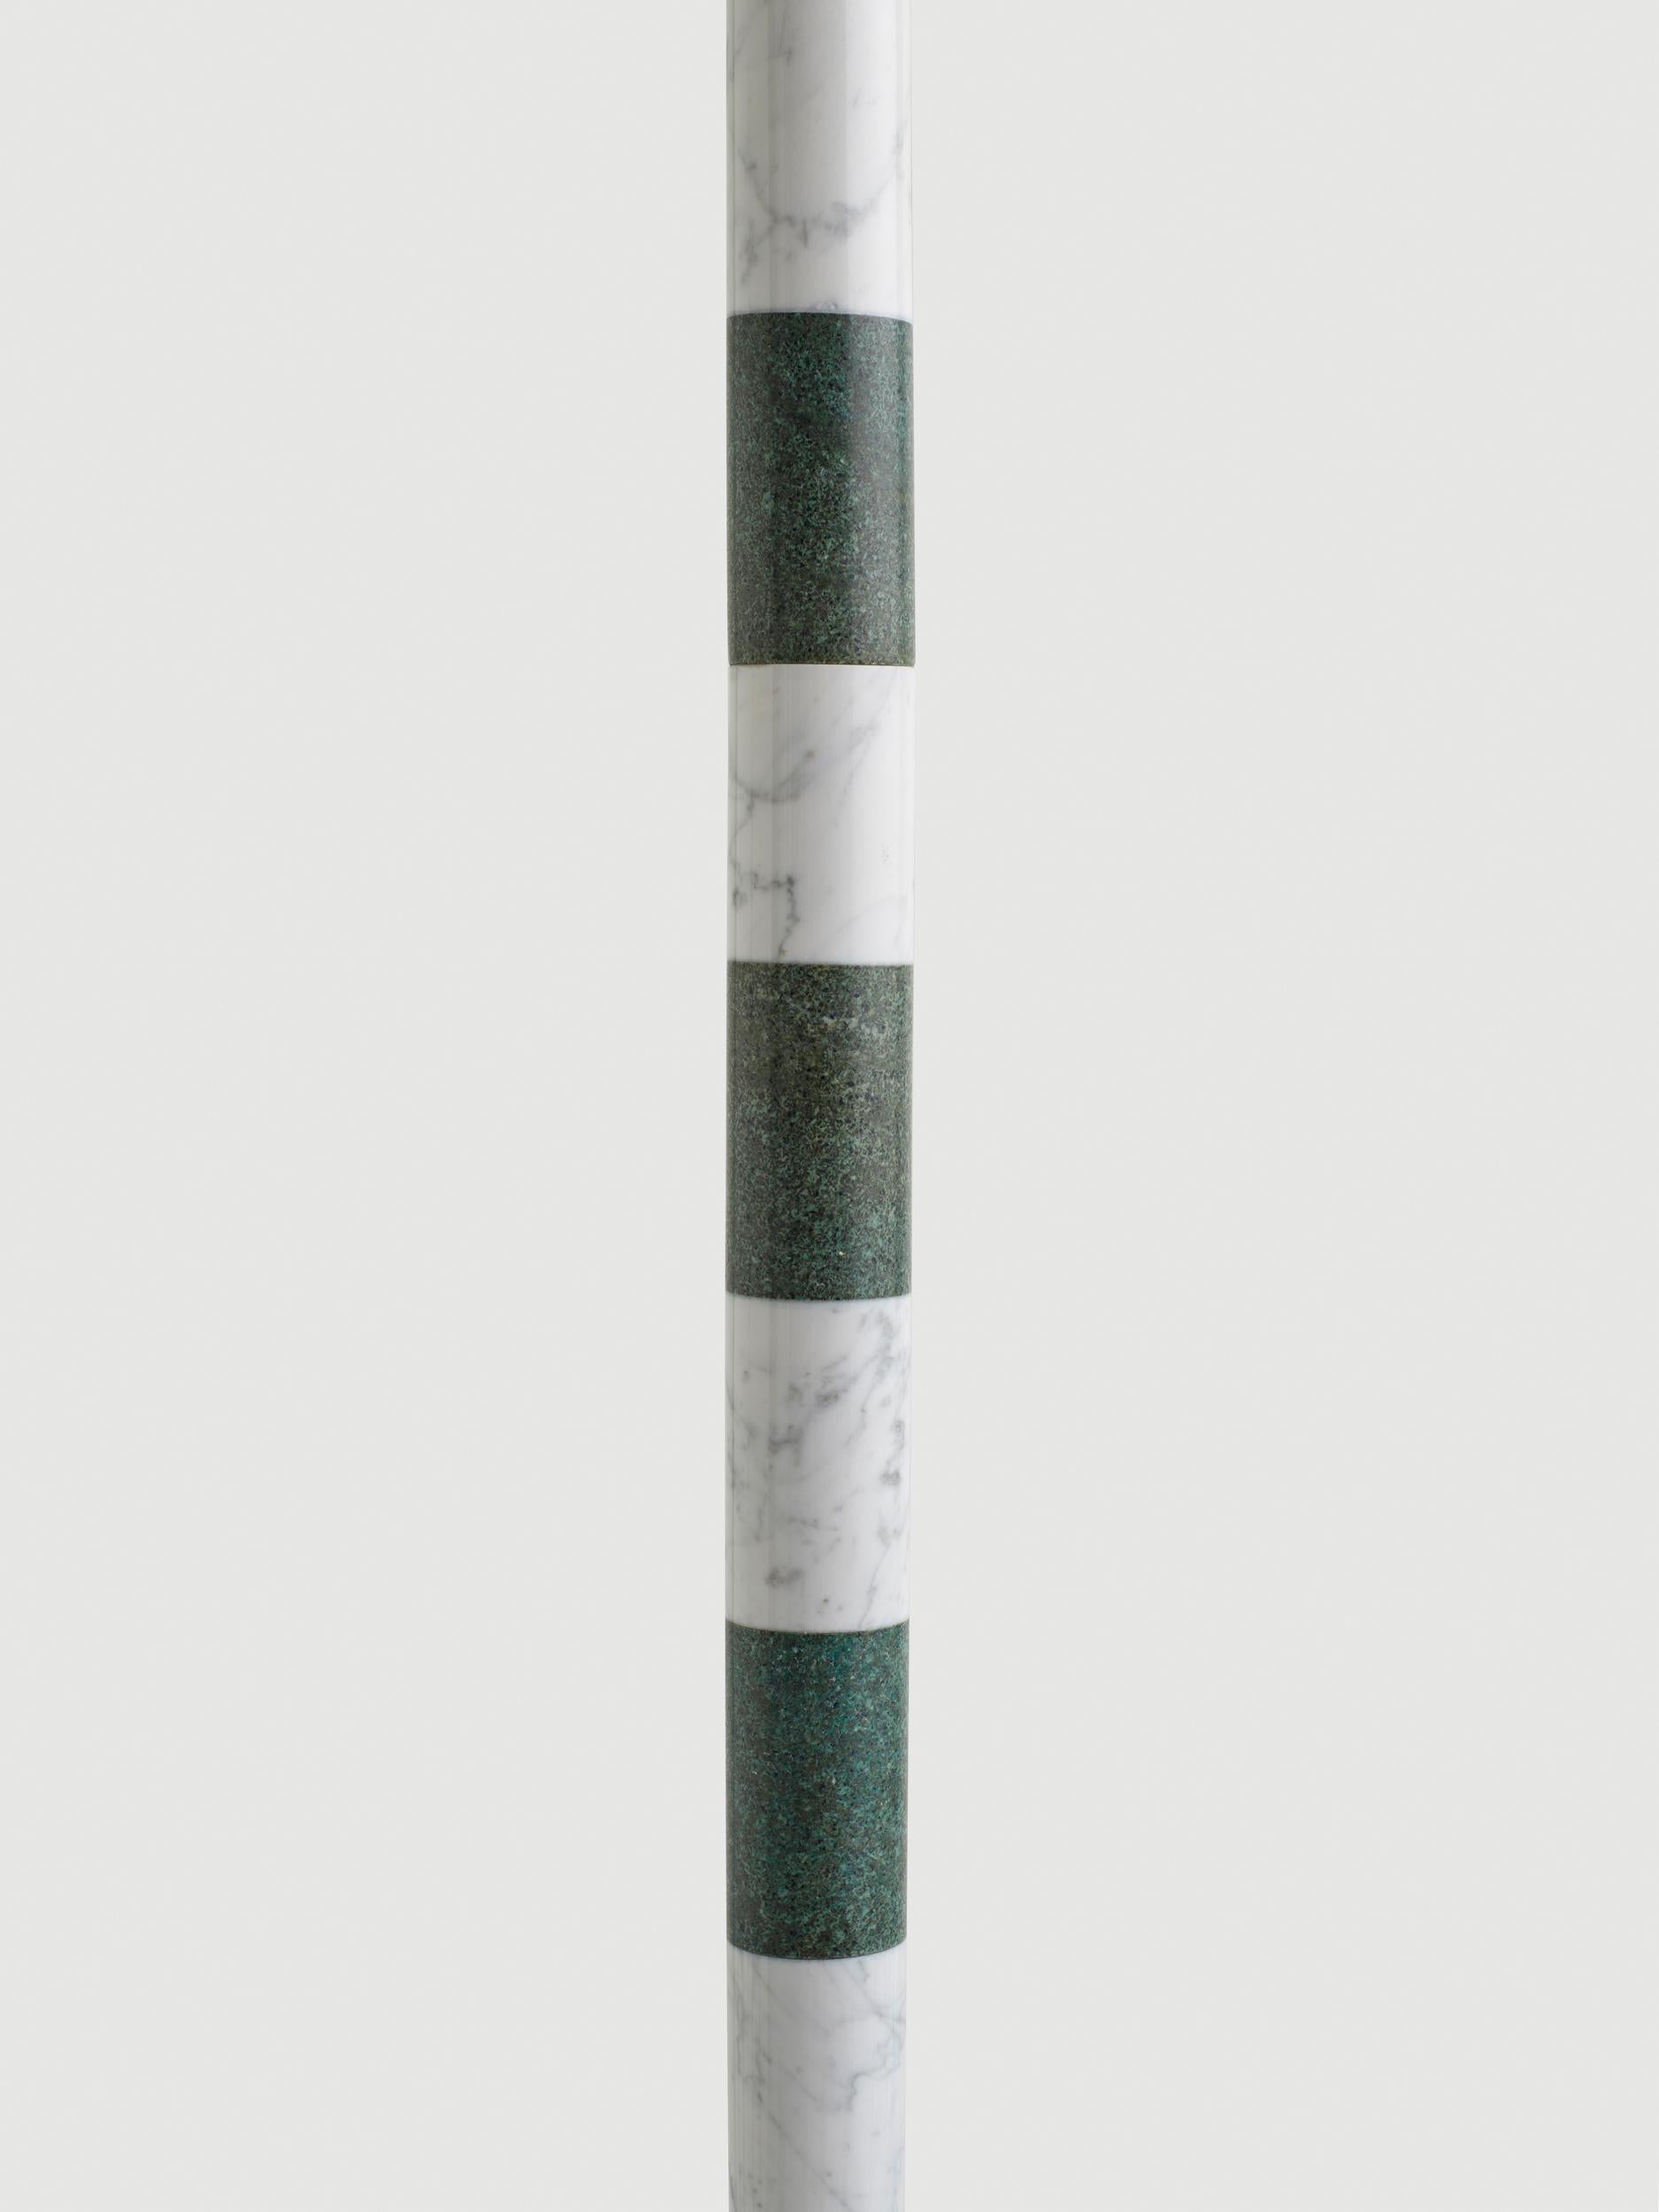 Carved 21st Century Green and White Marble SARE Floor Lamp with Milk Glass For Sale